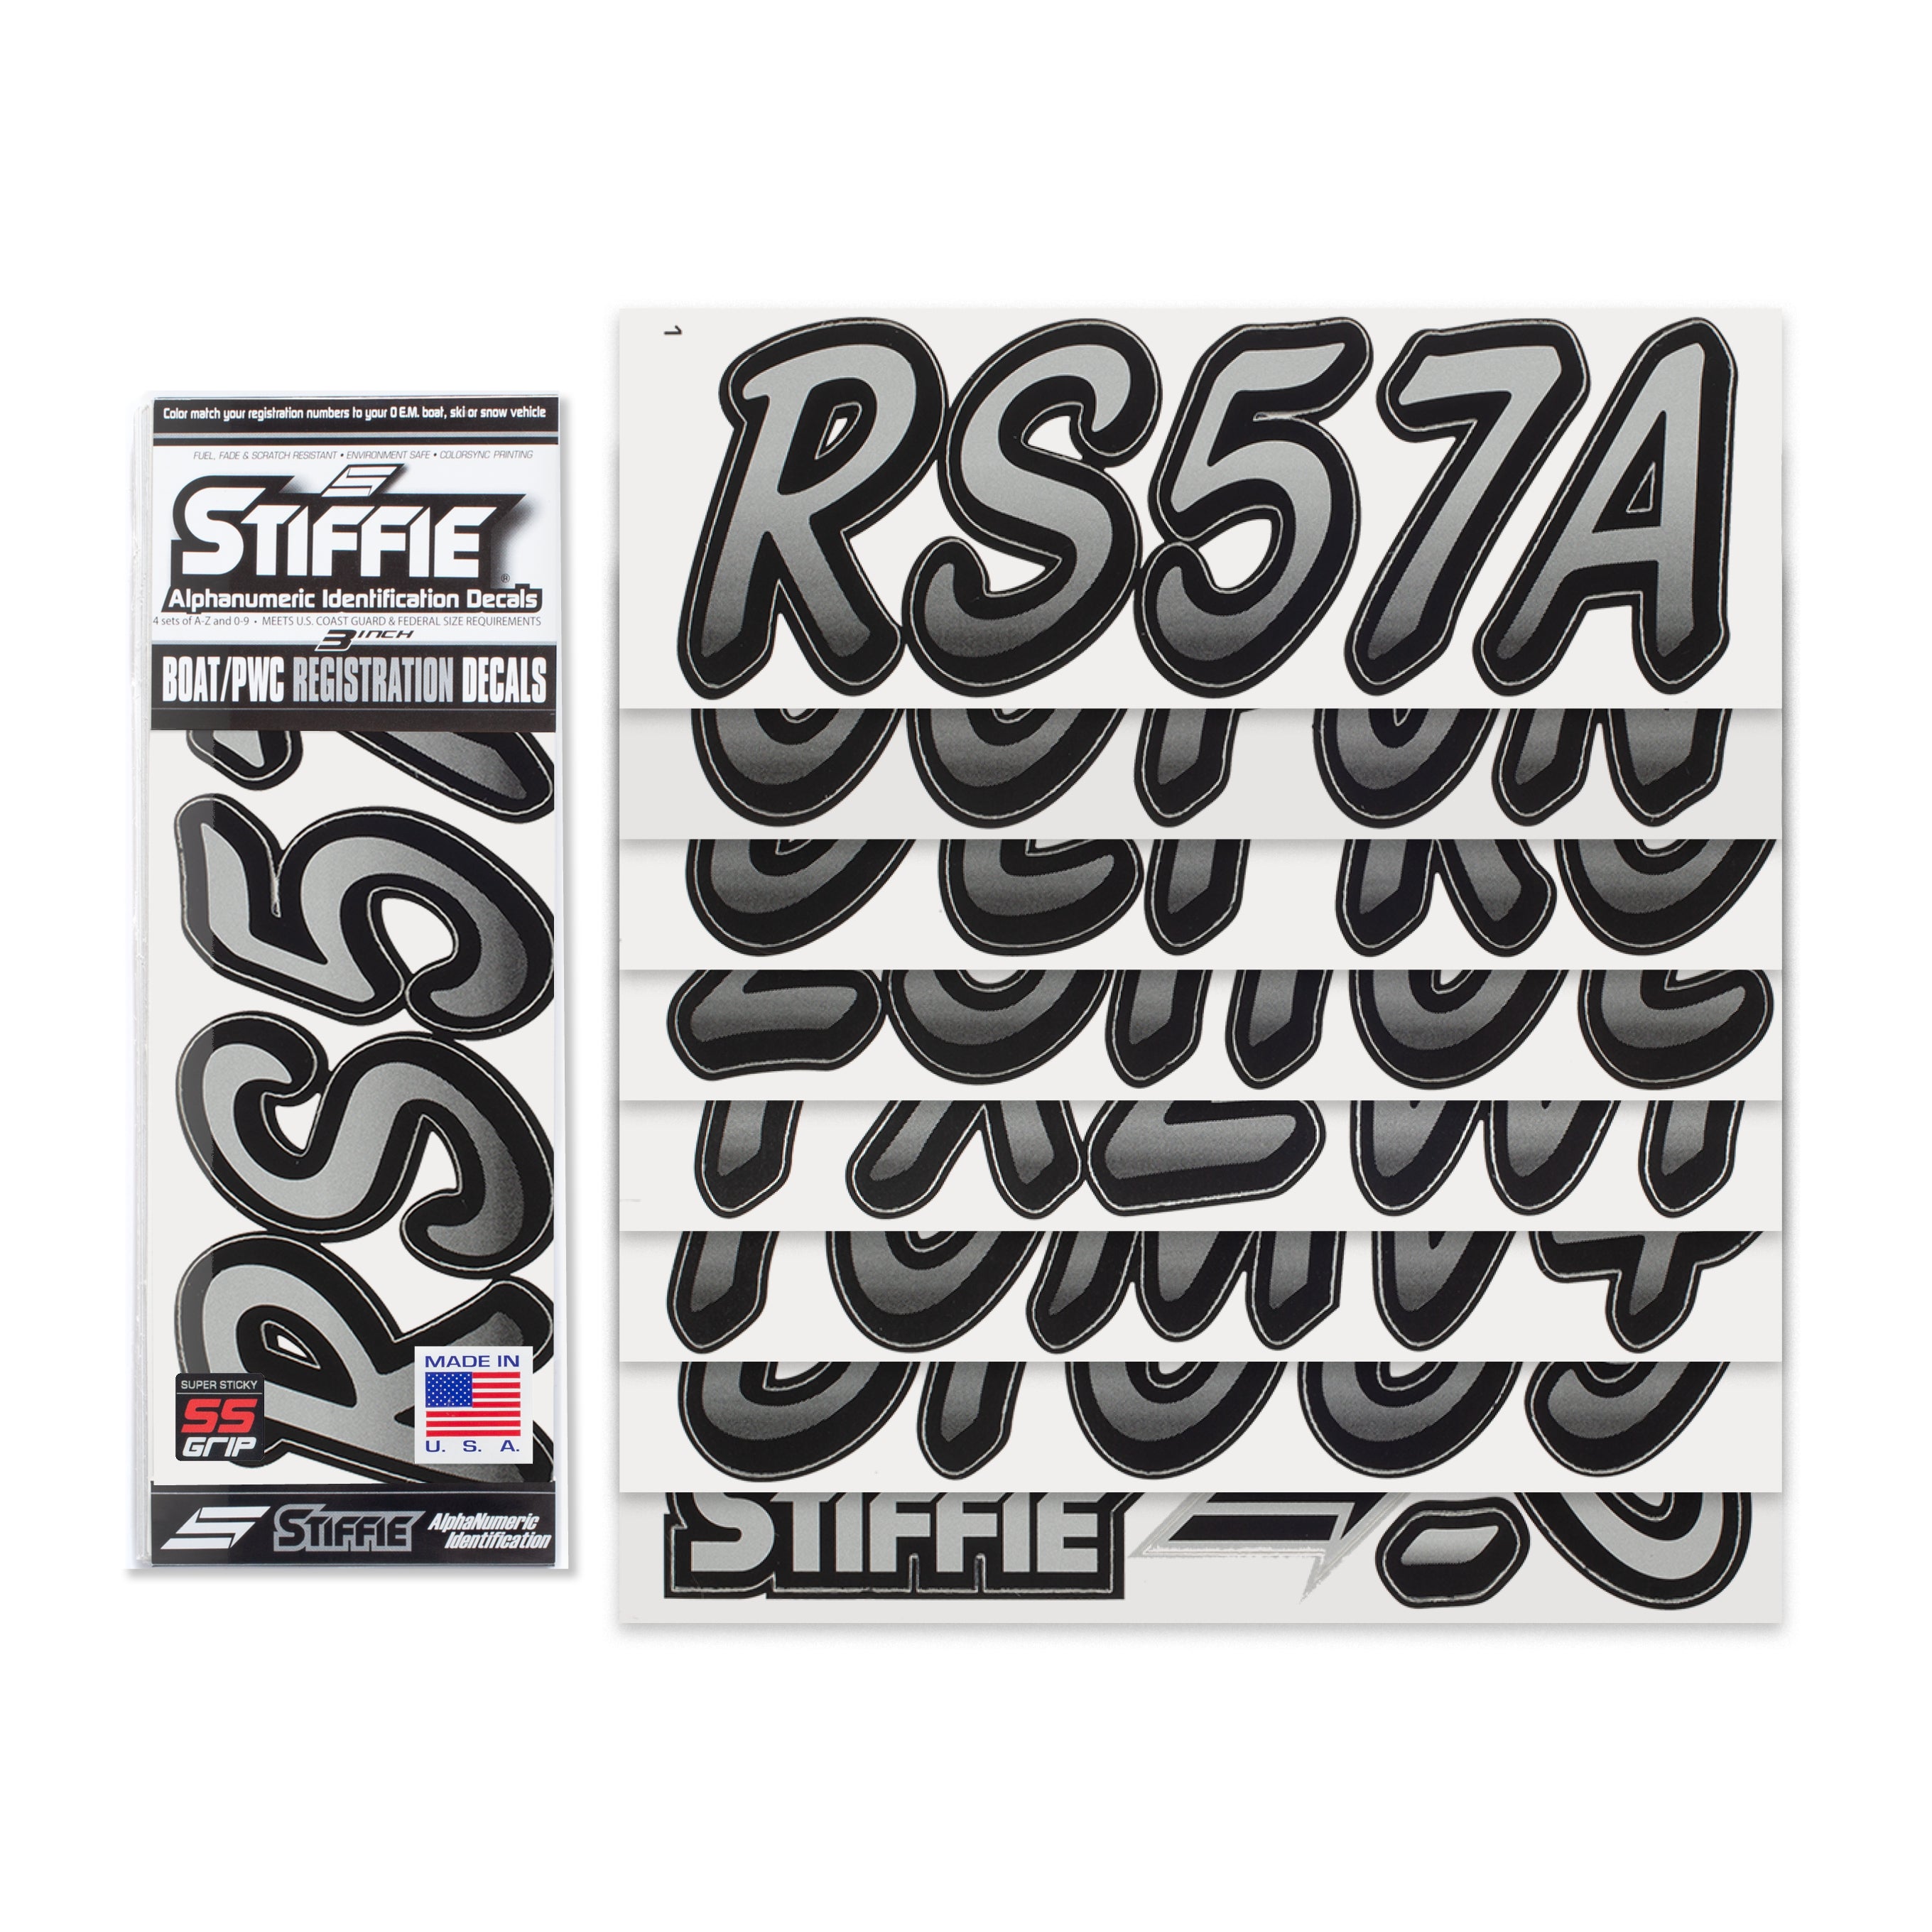 Stiffie Whipline Silver/Black Super Sticky 3" Alpha Numeric Registration Identification Numbers Stickers Decals for Sea-Doo Spark, Inflatable Boats, Ribs, Hypalon/PVC, PWC and Boats.